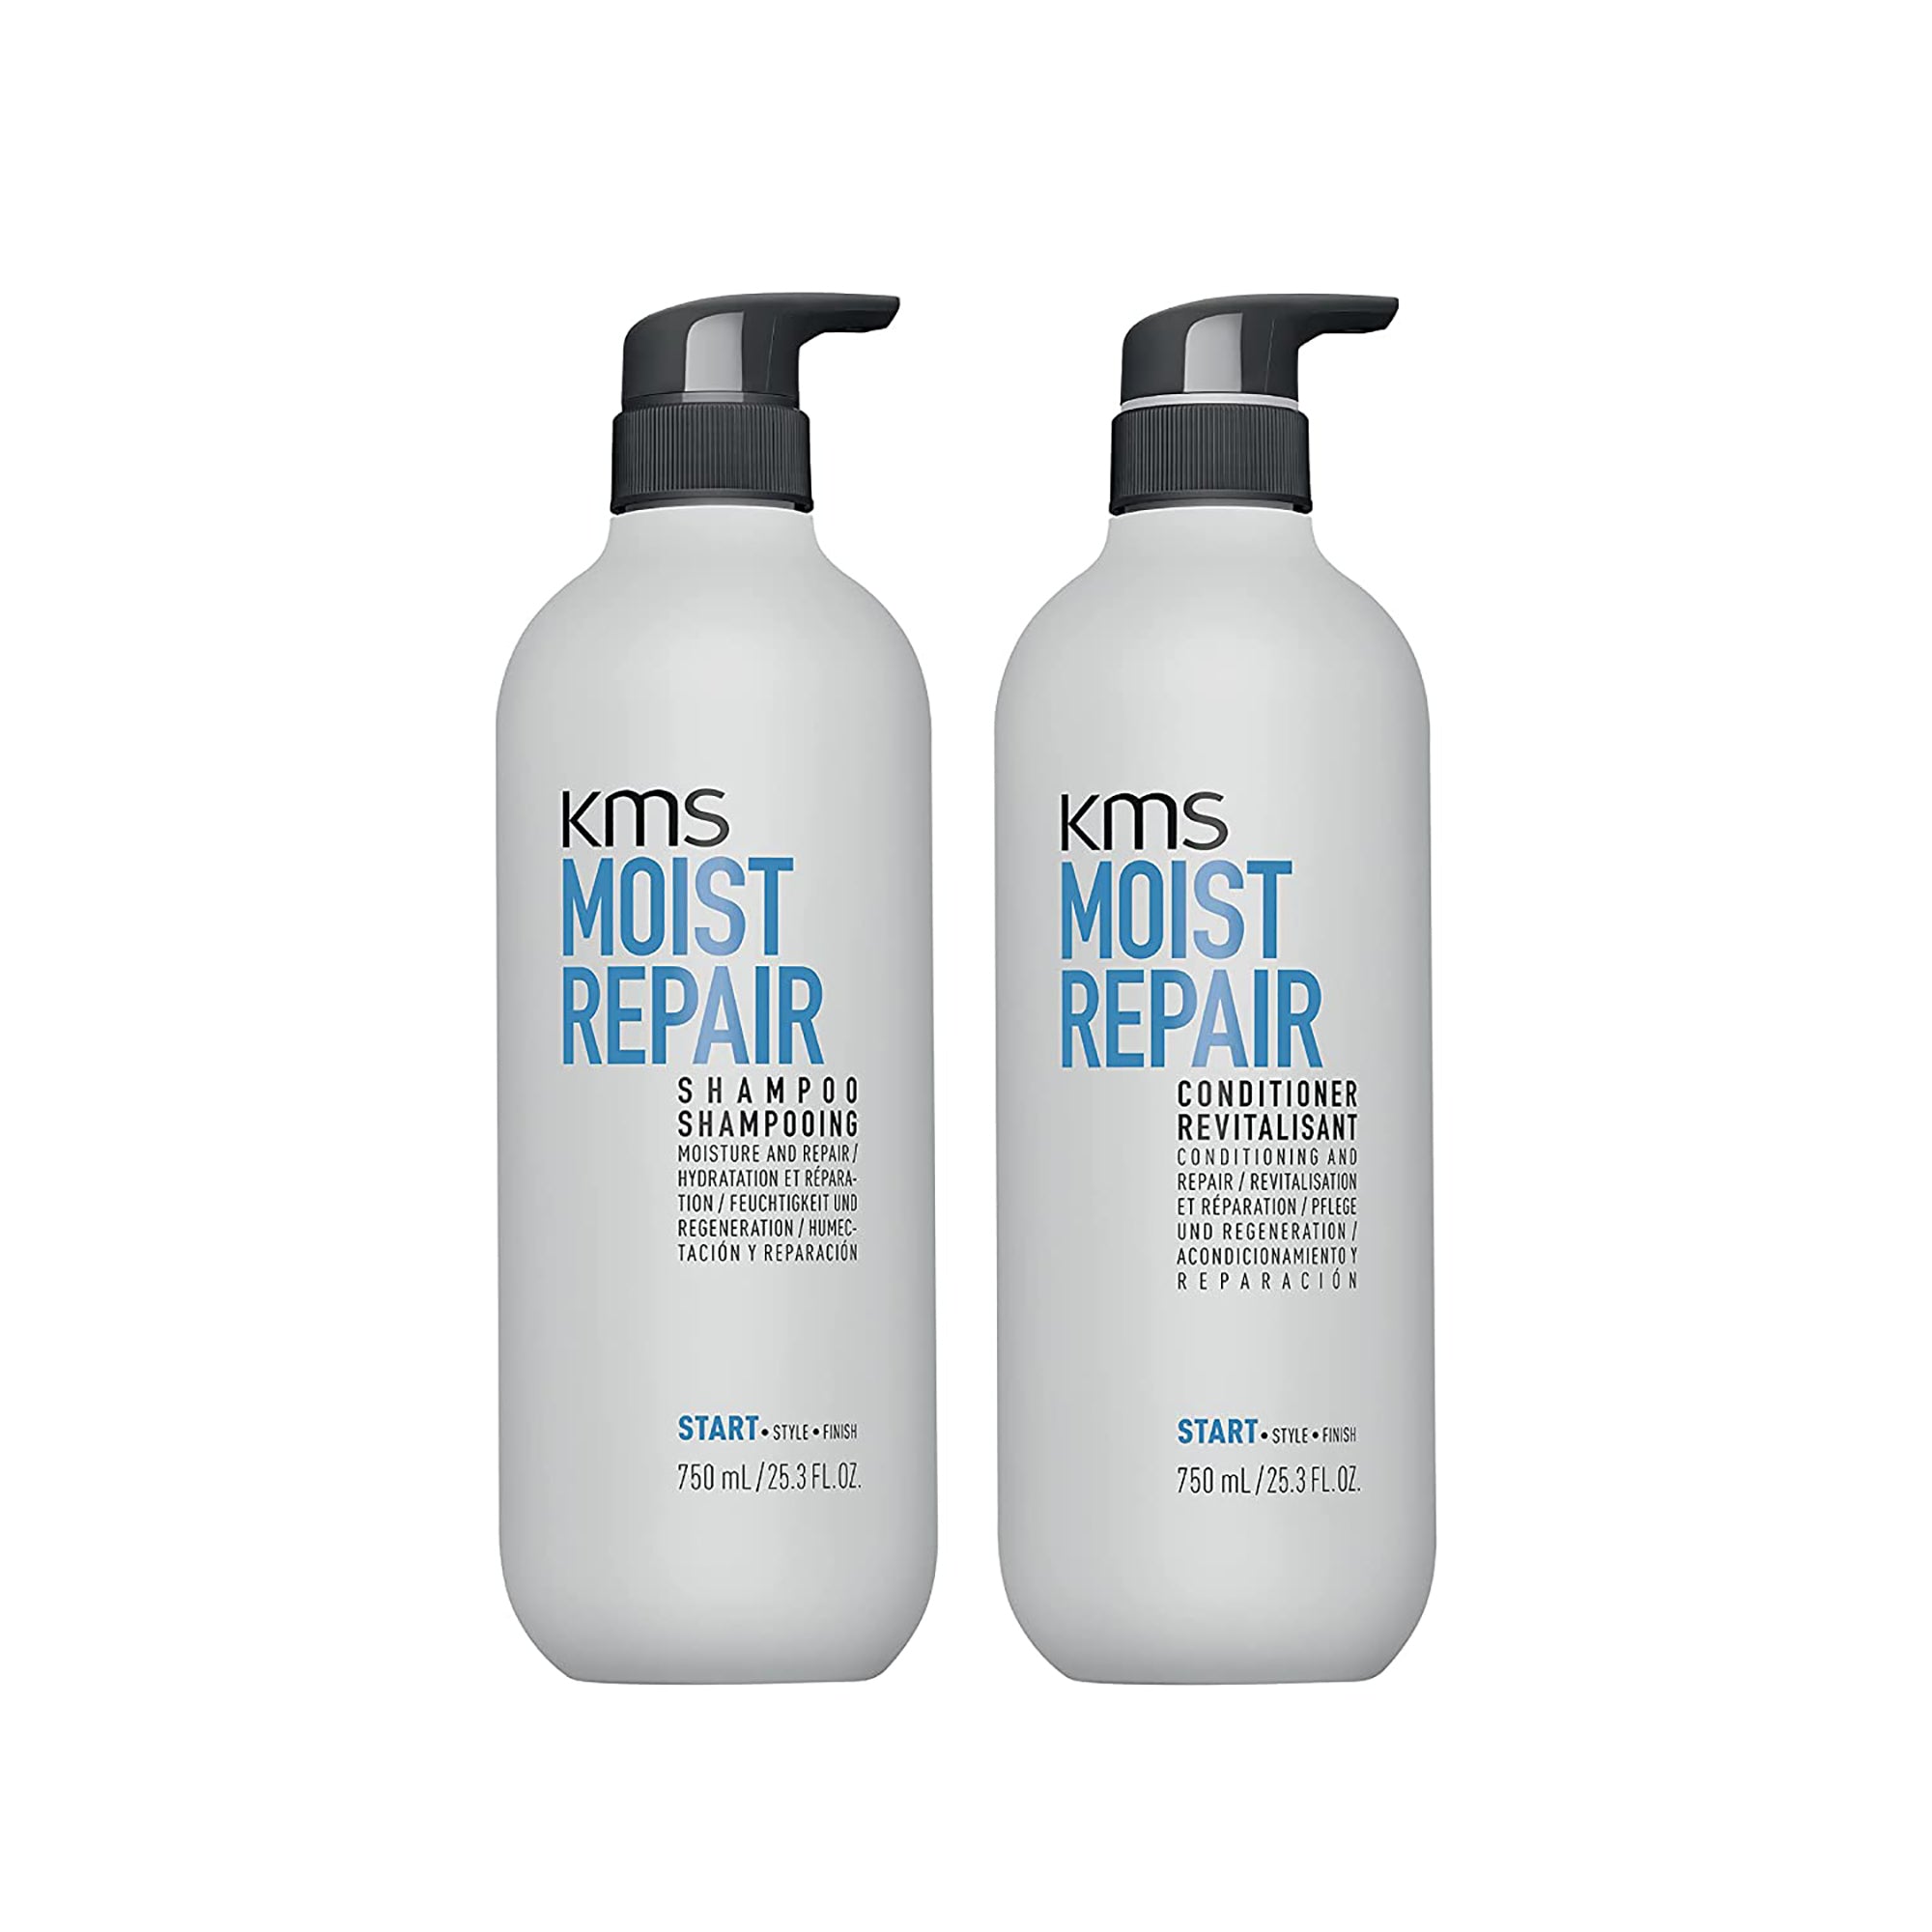 KMS MoistRepair Shampoo and Conditioner Duo - Beauty